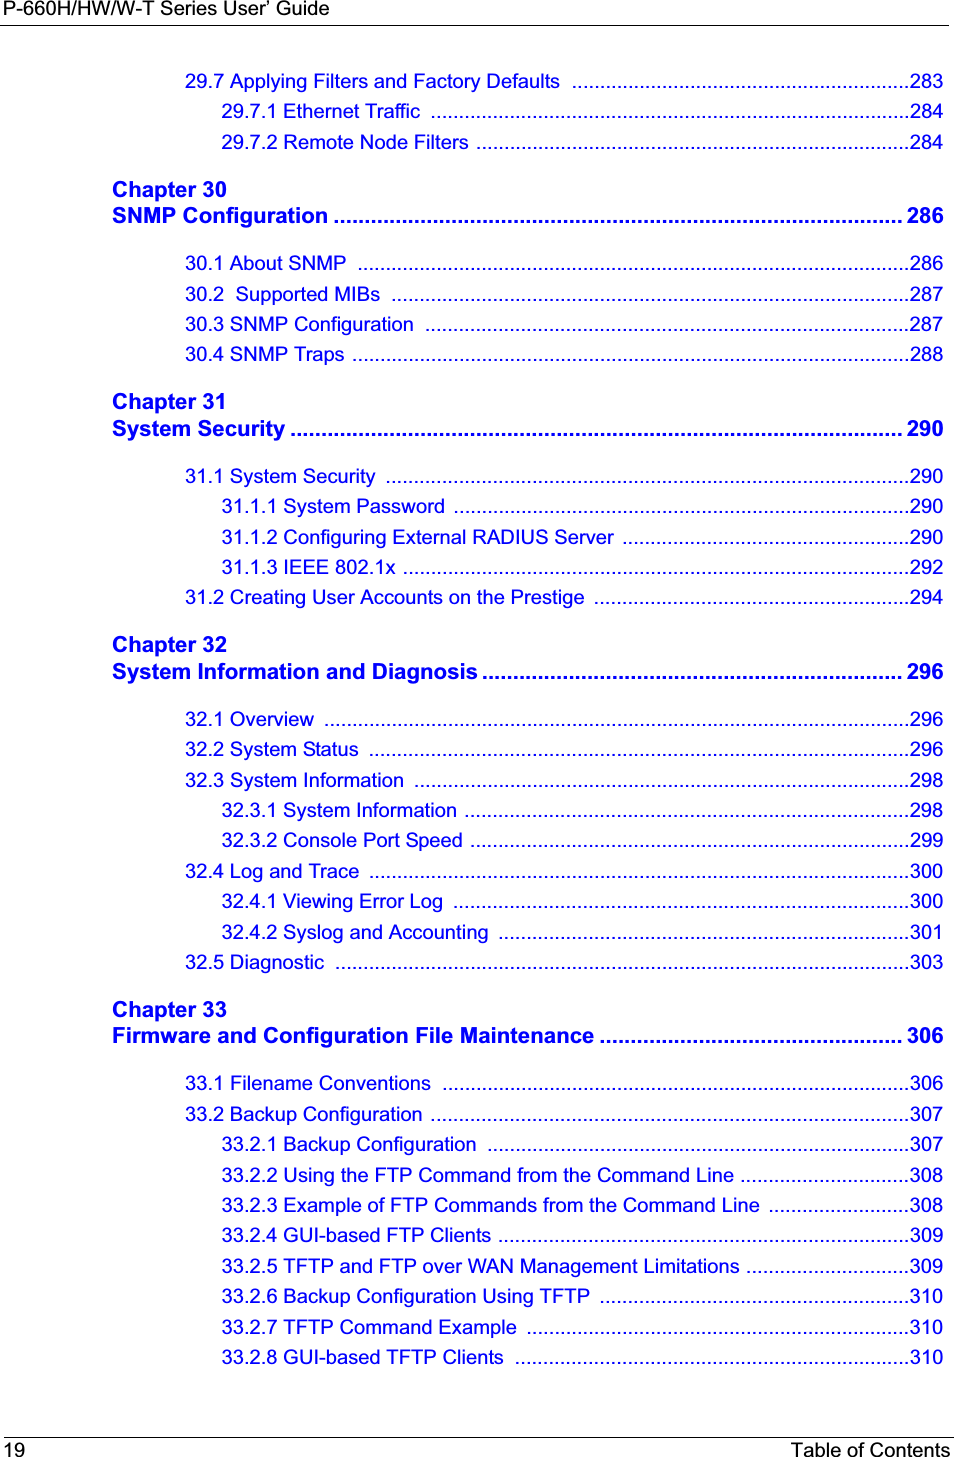 P-660H/HW/W-T Series User’ Guide19 Table of Contents29.7 Applying Filters and Factory Defaults  ............................................................28329.7.1 Ethernet Traffic  .....................................................................................28429.7.2 Remote Node Filters .............................................................................284Chapter 30SNMP Configuration ............................................................................................ 28630.1 About SNMP  ..................................................................................................28630.2  Supported MIBs  ............................................................................................28730.3 SNMP Configuration  ......................................................................................28730.4 SNMP Traps ...................................................................................................288Chapter 31System Security ................................................................................................... 29031.1 System Security  .............................................................................................29031.1.1 System Password  .................................................................................29031.1.2 Configuring External RADIUS Server  ...................................................29031.1.3 IEEE 802.1x ..........................................................................................29231.2 Creating User Accounts on the Prestige  ........................................................294Chapter 32System Information and Diagnosis .................................................................... 29632.1 Overview  ........................................................................................................29632.2 System Status  ................................................................................................29632.3 System Information  ........................................................................................29832.3.1 System Information ...............................................................................29832.3.2 Console Port Speed ..............................................................................29932.4 Log and Trace  ................................................................................................30032.4.1 Viewing Error Log  .................................................................................30032.4.2 Syslog and Accounting  .........................................................................30132.5 Diagnostic  ......................................................................................................303Chapter 33Firmware and Configuration File Maintenance ................................................. 30633.1 Filename Conventions  ...................................................................................30633.2 Backup Configuration .....................................................................................30733.2.1 Backup Configuration  ...........................................................................30733.2.2 Using the FTP Command from the Command Line ..............................30833.2.3 Example of FTP Commands from the Command Line  .........................30833.2.4 GUI-based FTP Clients .........................................................................30933.2.5 TFTP and FTP over WAN Management Limitations .............................30933.2.6 Backup Configuration Using TFTP  .......................................................31033.2.7 TFTP Command Example  ....................................................................31033.2.8 GUI-based TFTP Clients  ......................................................................310